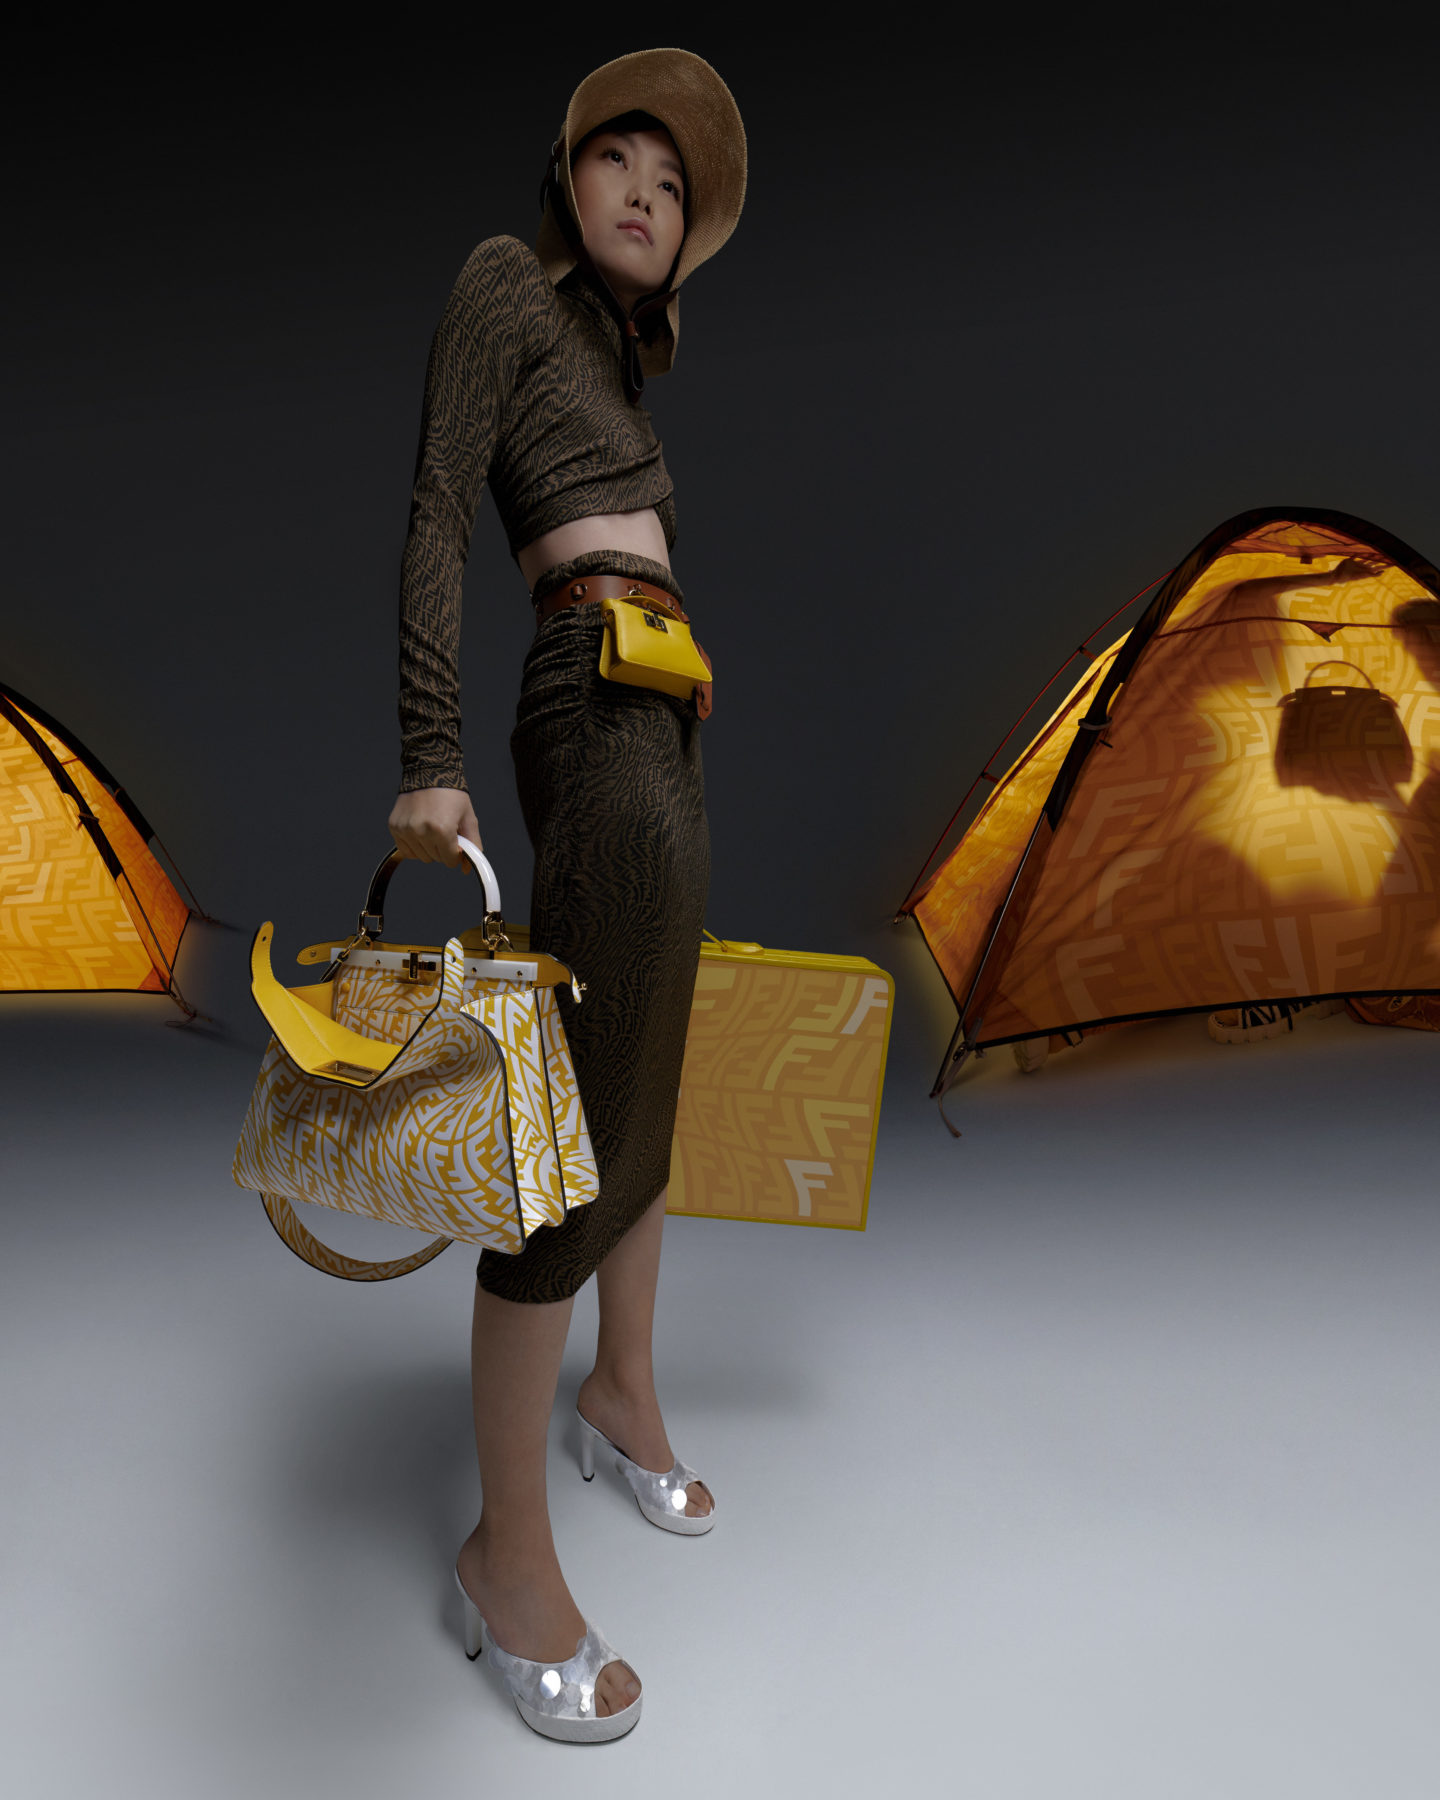 FENDI : THE SUMMER 2021 CAPSULE COLLAB' WITH SARAH COLEMAN